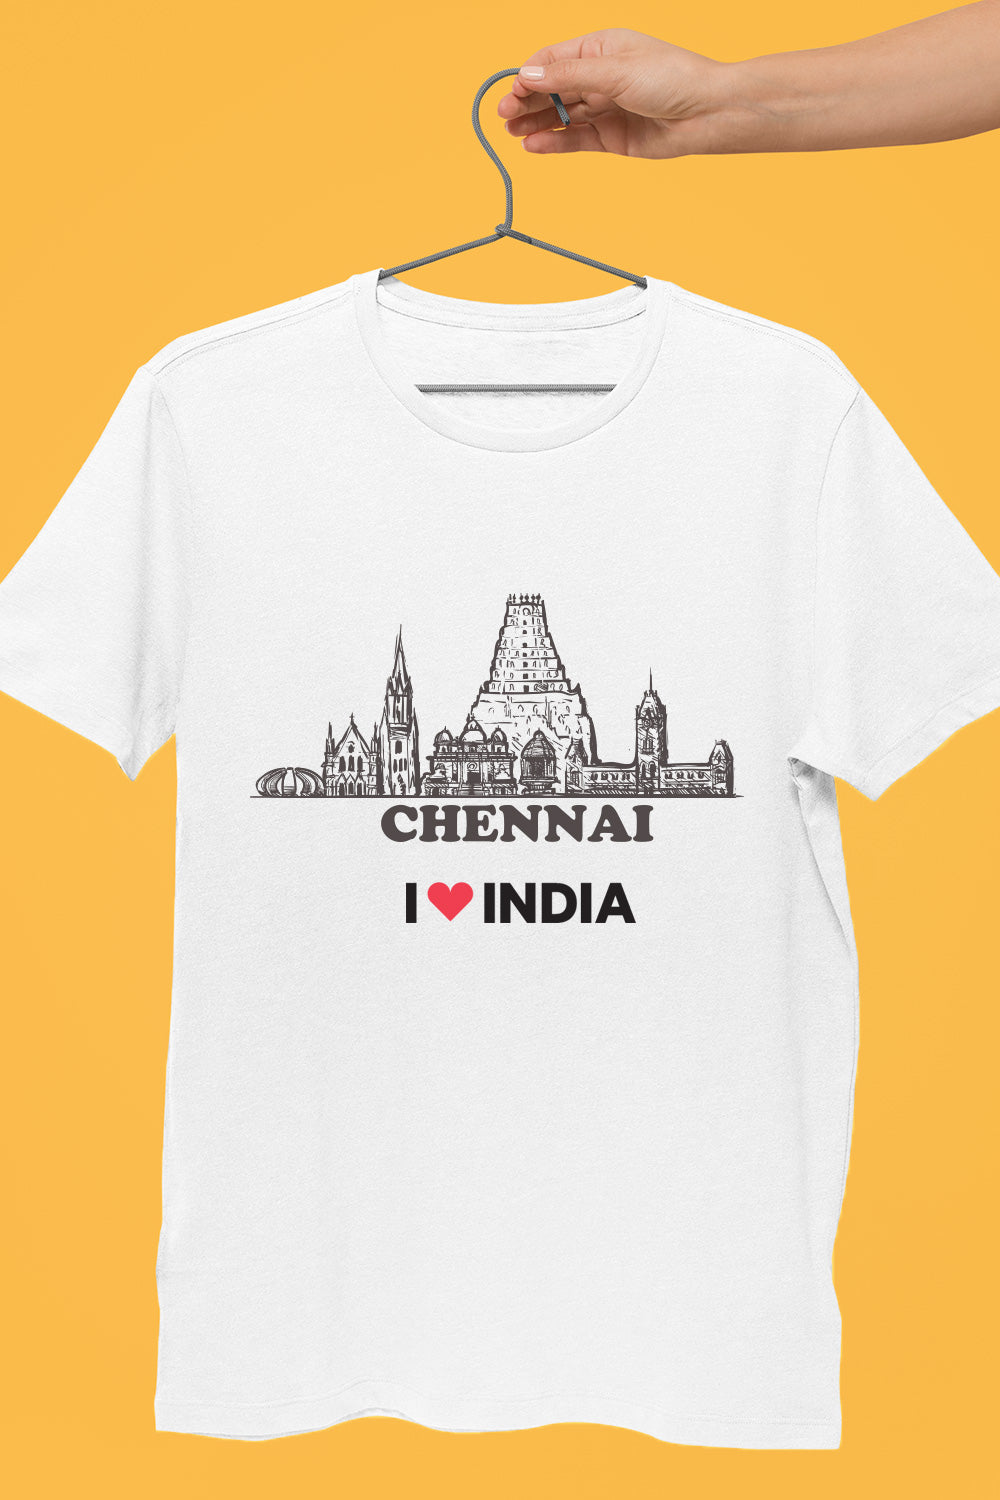 Chennai Temple - Styched in India Graphic T-Shirt White Color